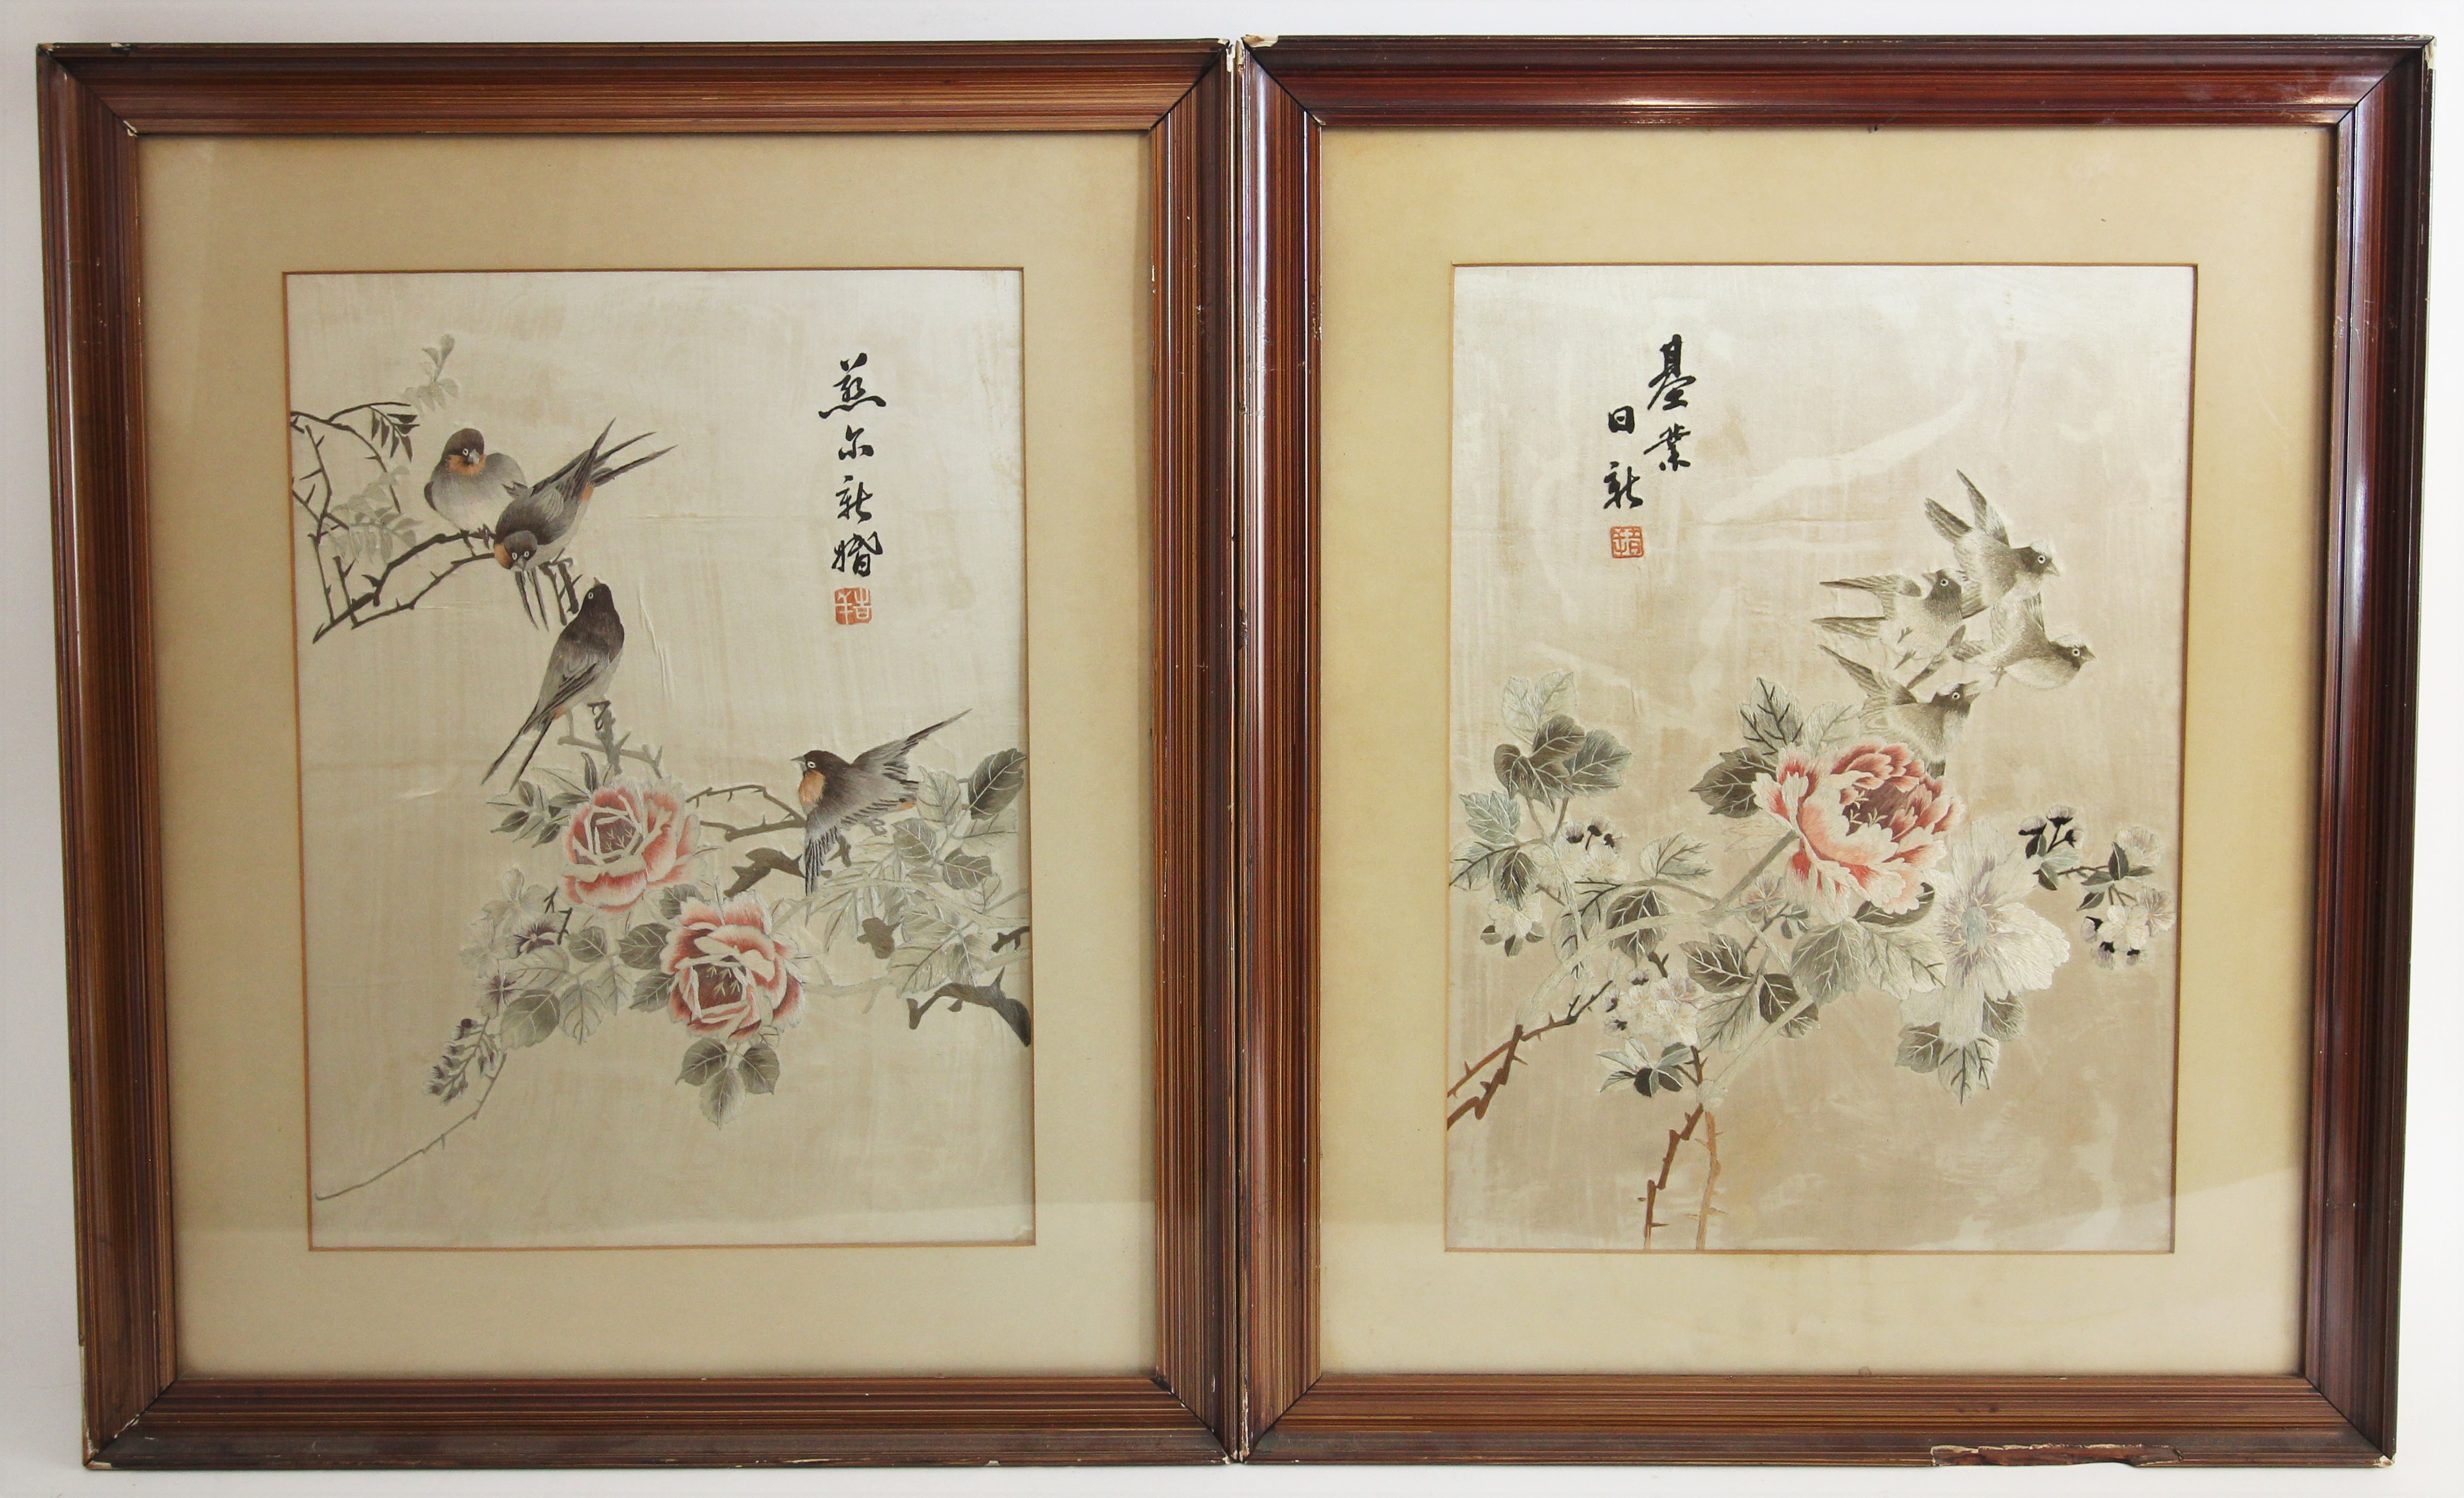 A pair of Chinese silk embroidered panels, late 19th century, each rectangular panel embroidered